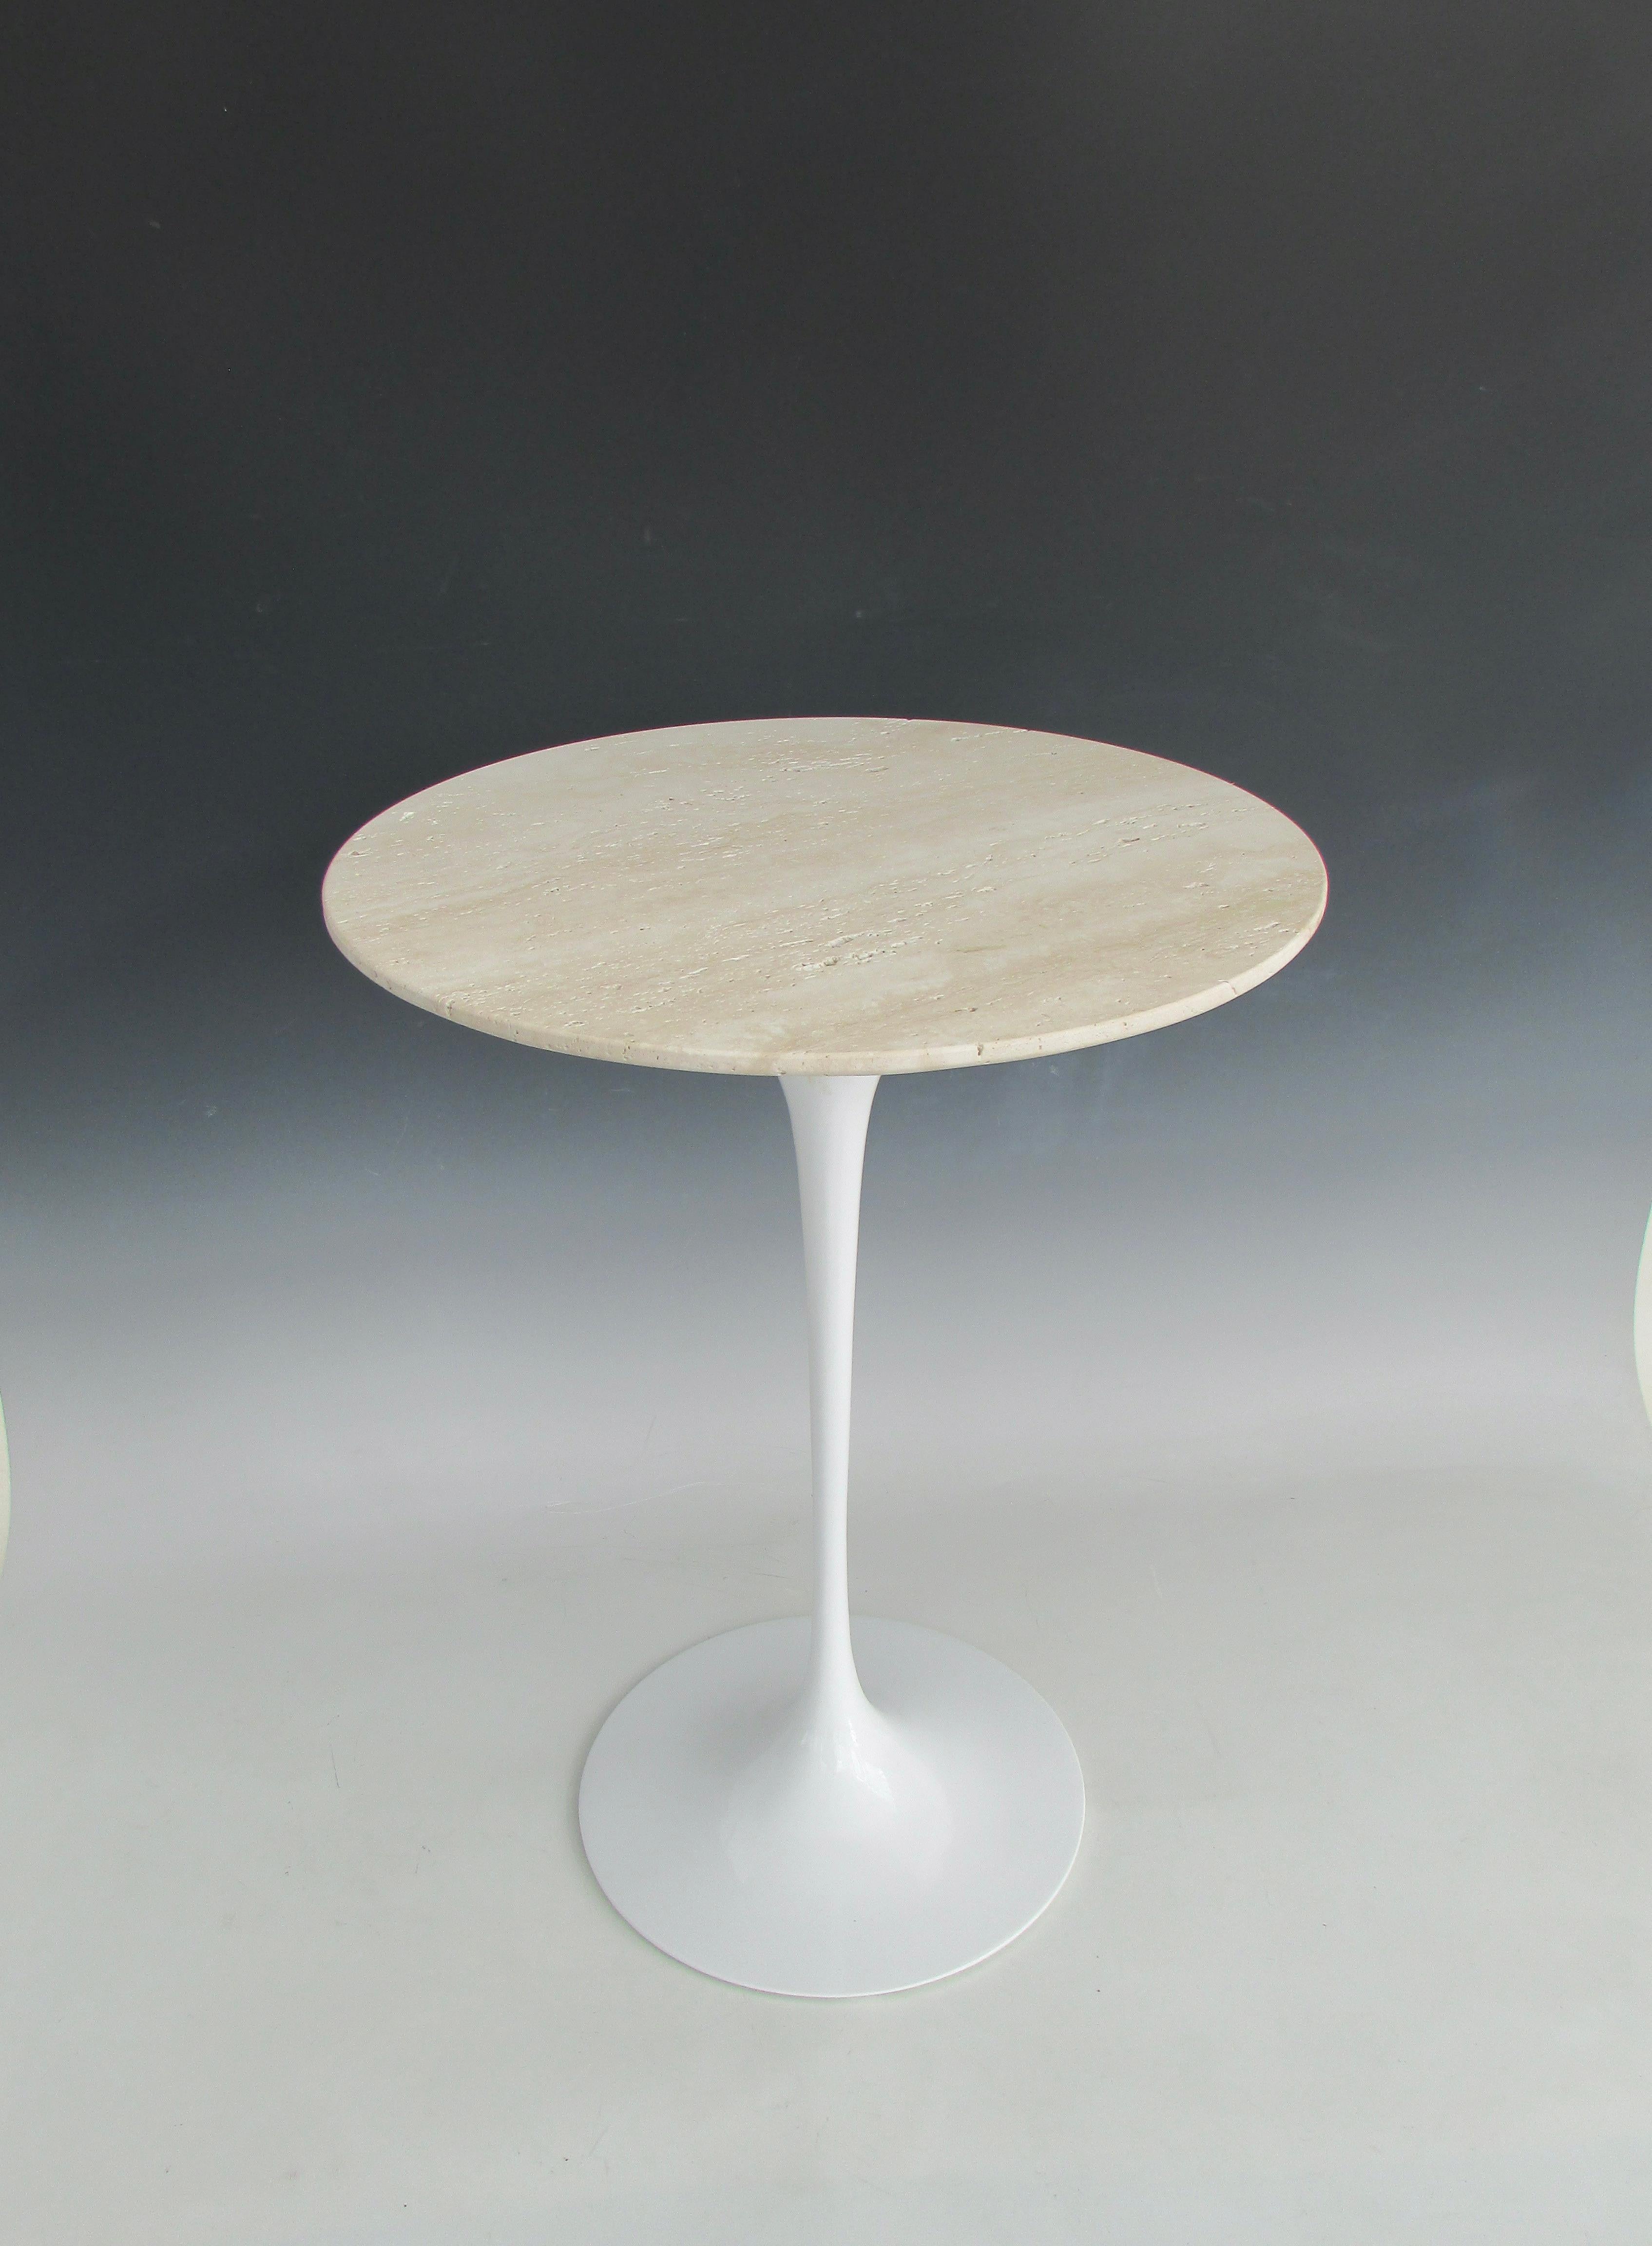 Early Eero Saarinen for Knoll Cast Iron Tulip Table with Custom Travertine Top In Good Condition For Sale In Ferndale, MI